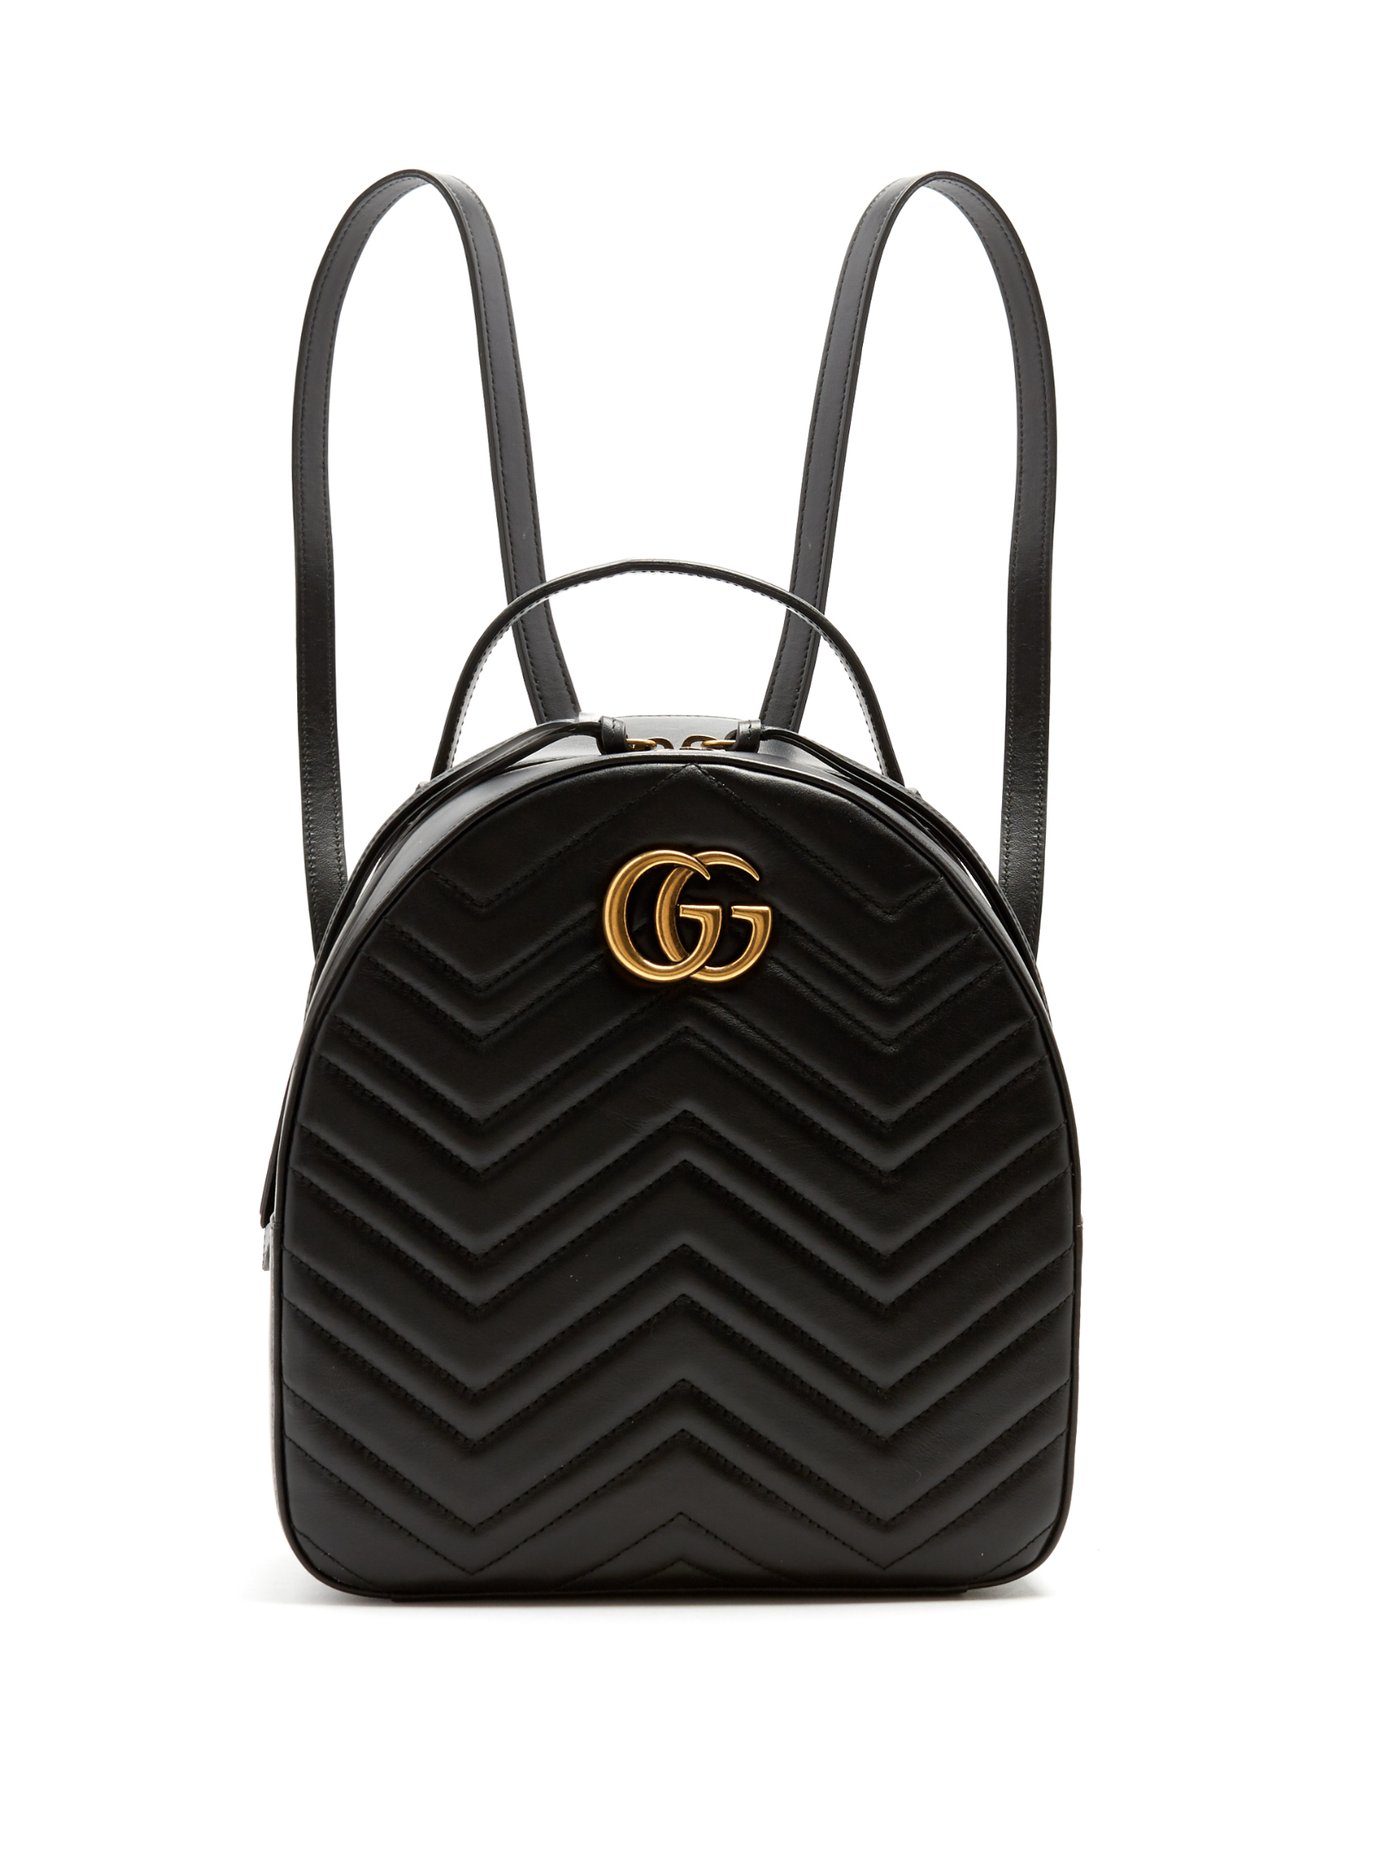 gg marmont quilted leather backpack price